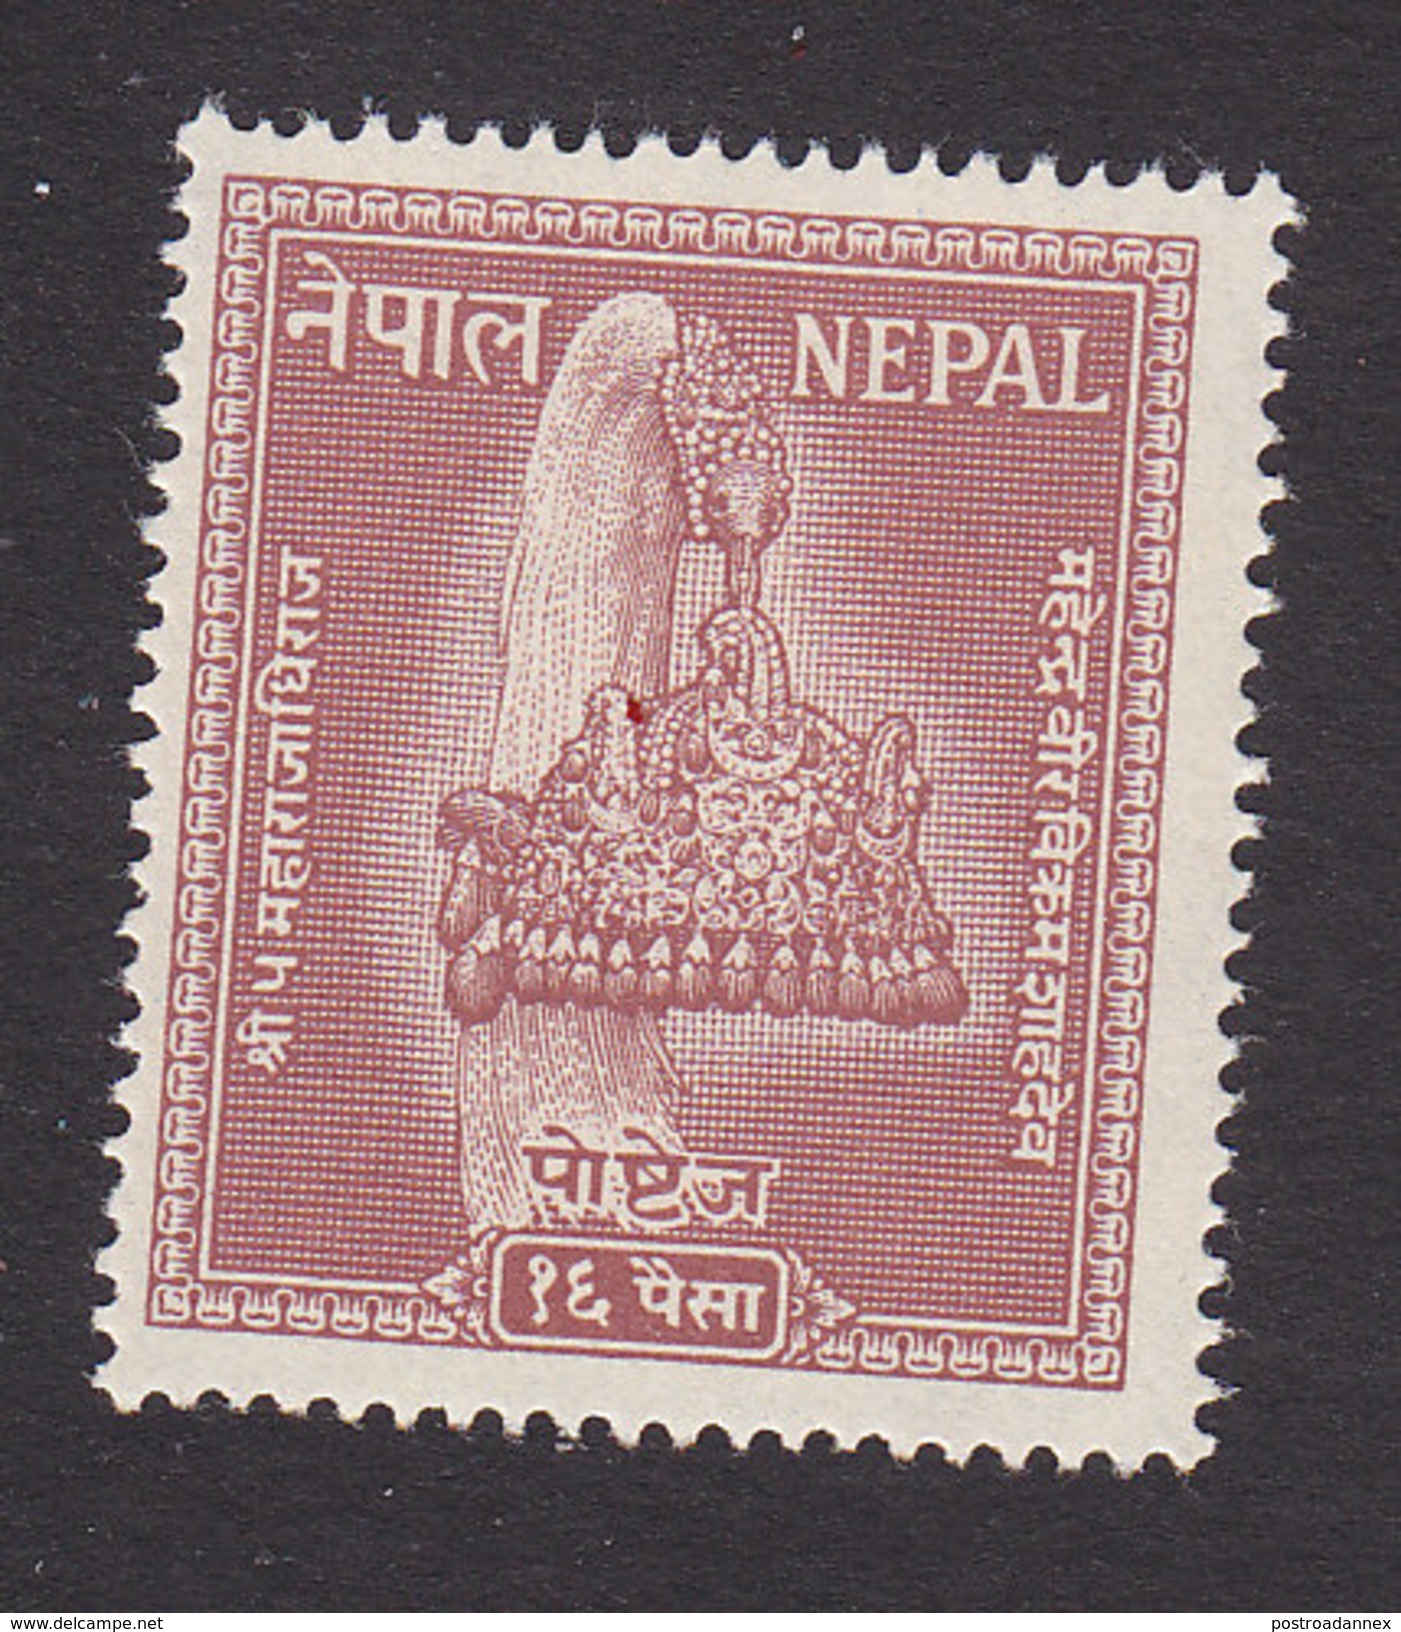 Nepal, Scott #95, Mint Never Hinged, Crown Of Nepal, Issued 1957 - Nepal